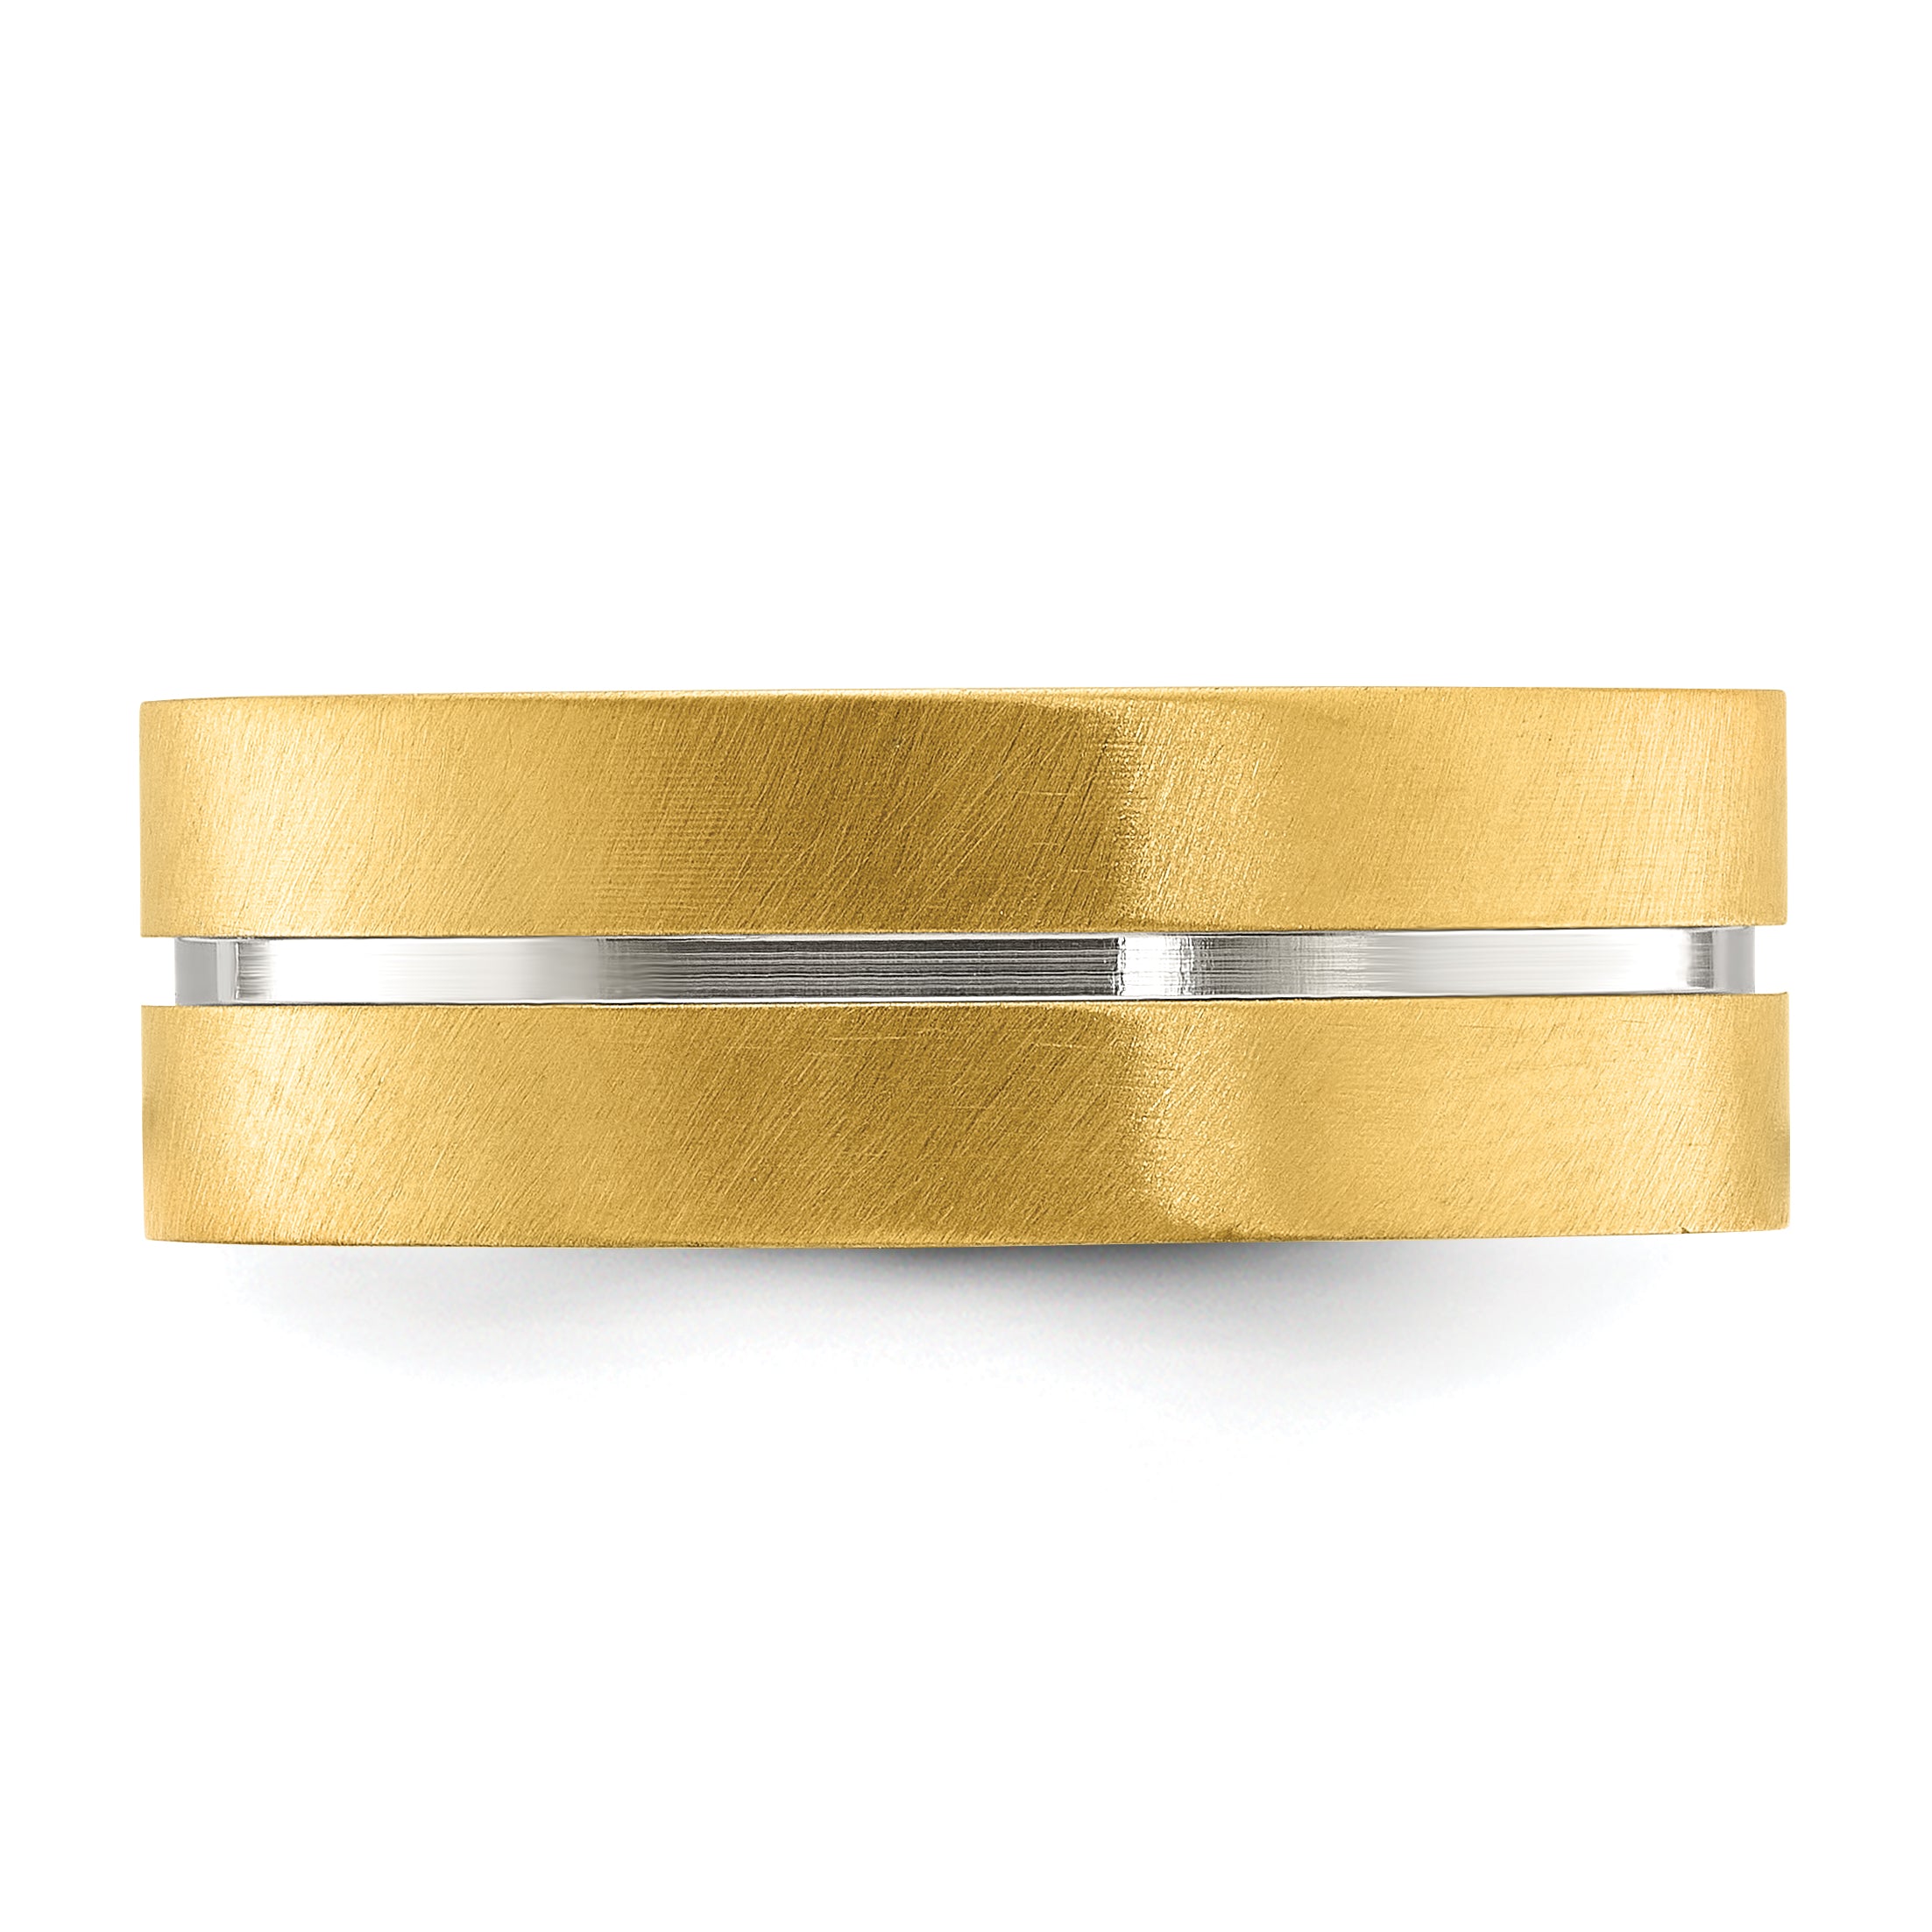 Titanium Brushed and Polished Yellow IP-plated 8mm Band